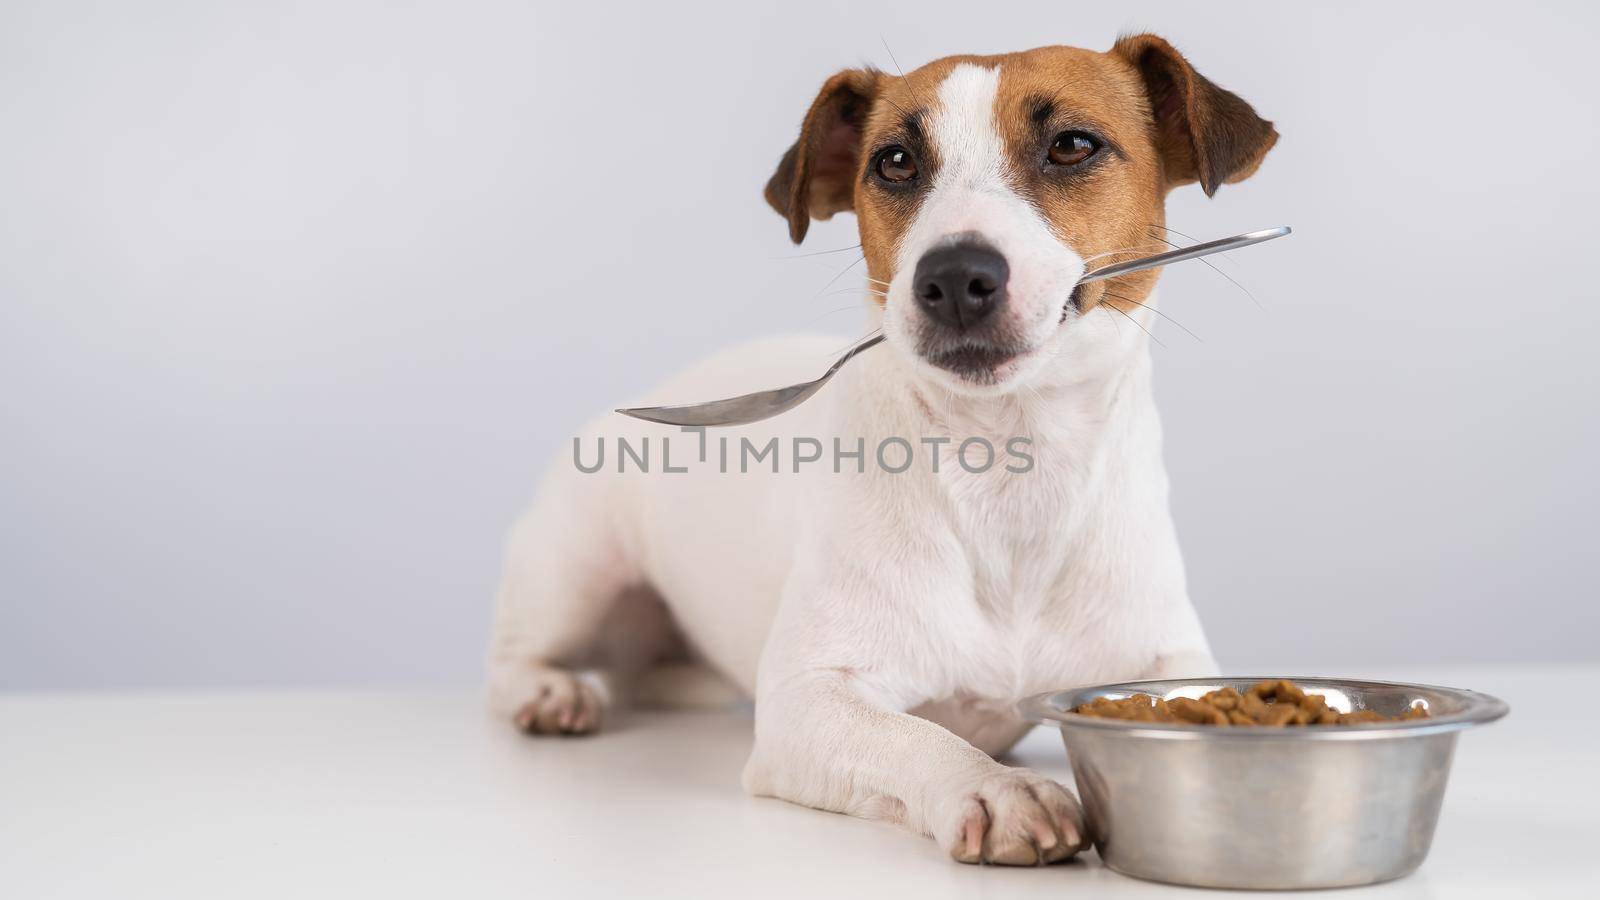 Jack Russell Terrier dog lies near a bowl of dry food and holds a spoon in his mouth on a white background